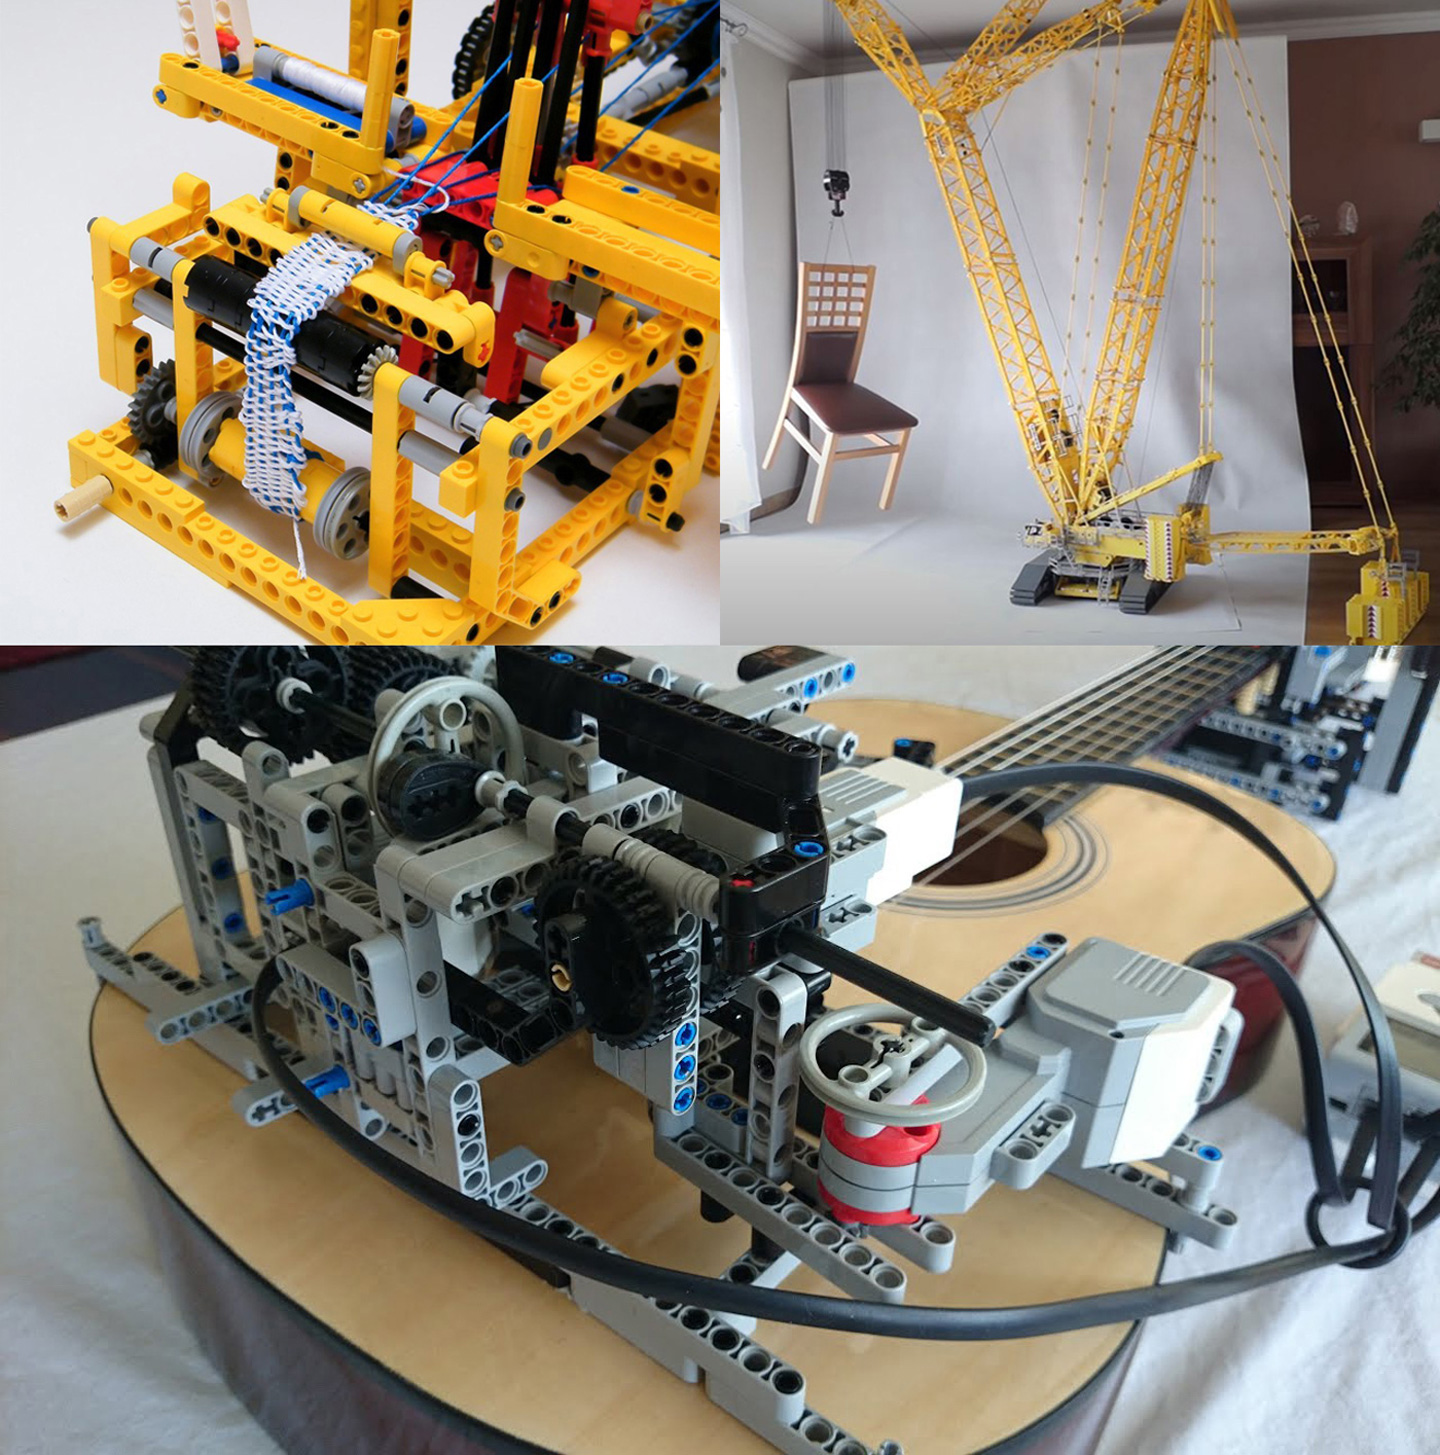 Some of the practical uses of LEGO Technic system include: (a) mechanical loom (upper left, source: N. Lespour); (b) crawler crane for lifting (upper right, source: D. Szmandra), and (c) guitar playing (bottom, source: TECHNICally Possible)